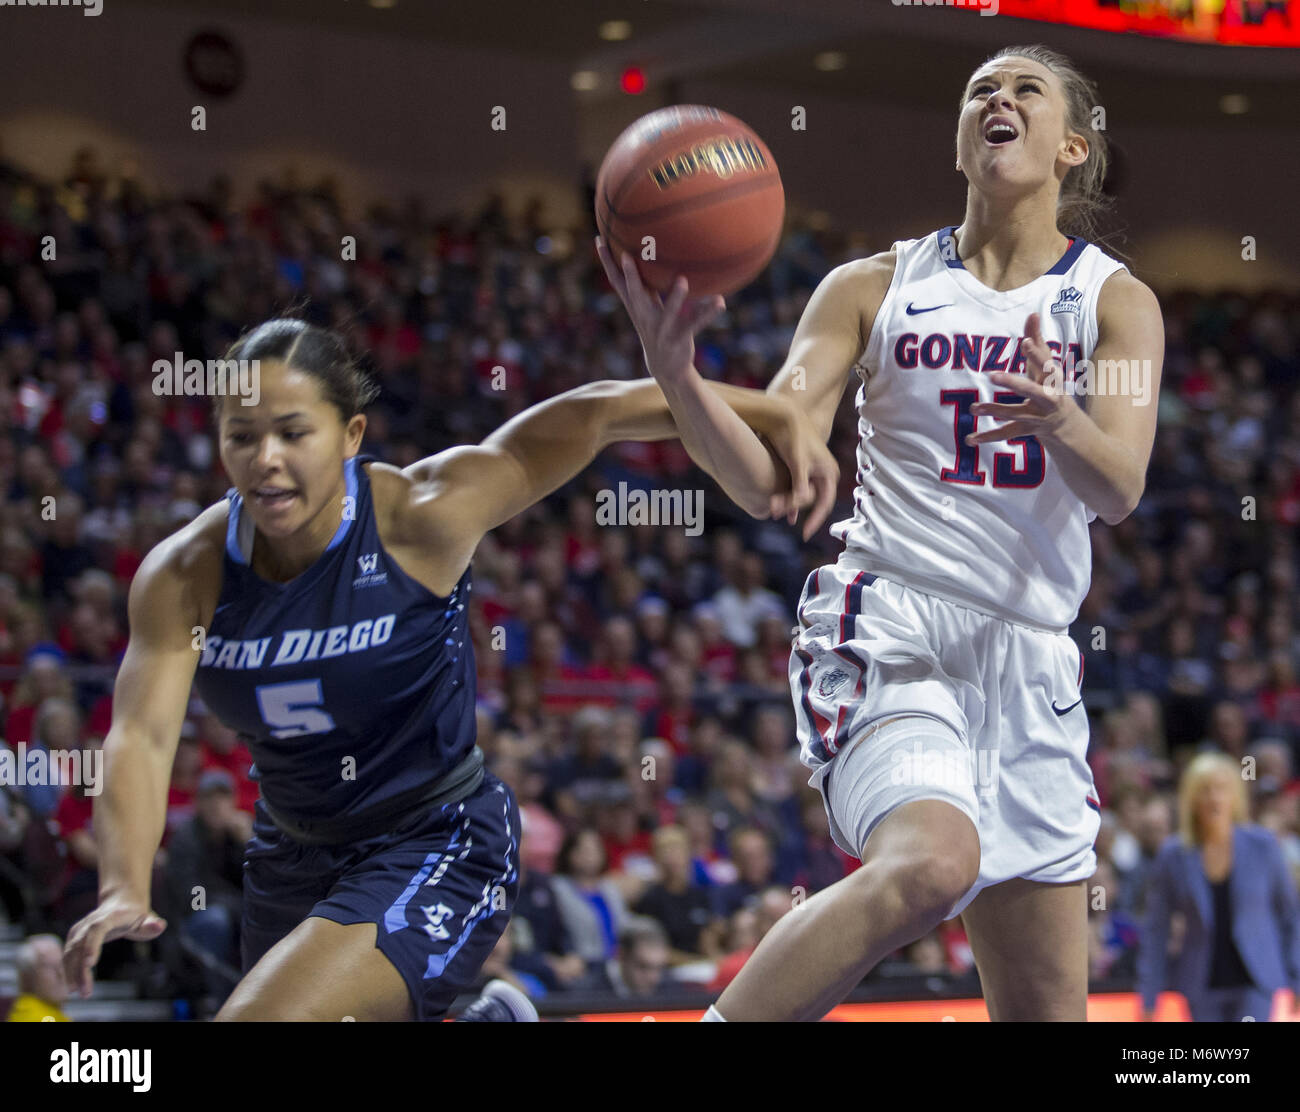 Las Vegas, Nevada, USA. 31st Jan, 2018. San Diego Toreros guard Aubrey Ward-El (5) fouls Gonzaga Bulldogs forward Jill Barta (13) on her way to the basket during the first period of an NCAA college basketball game in the women's finals of the West Coast Conference tournament, Tuesday, March 6, 2018, in Las Vegas.Photo by L.E. Baskow Credit: L.E. Baskow/ZUMA Wire/Alamy Live News Stock Photo